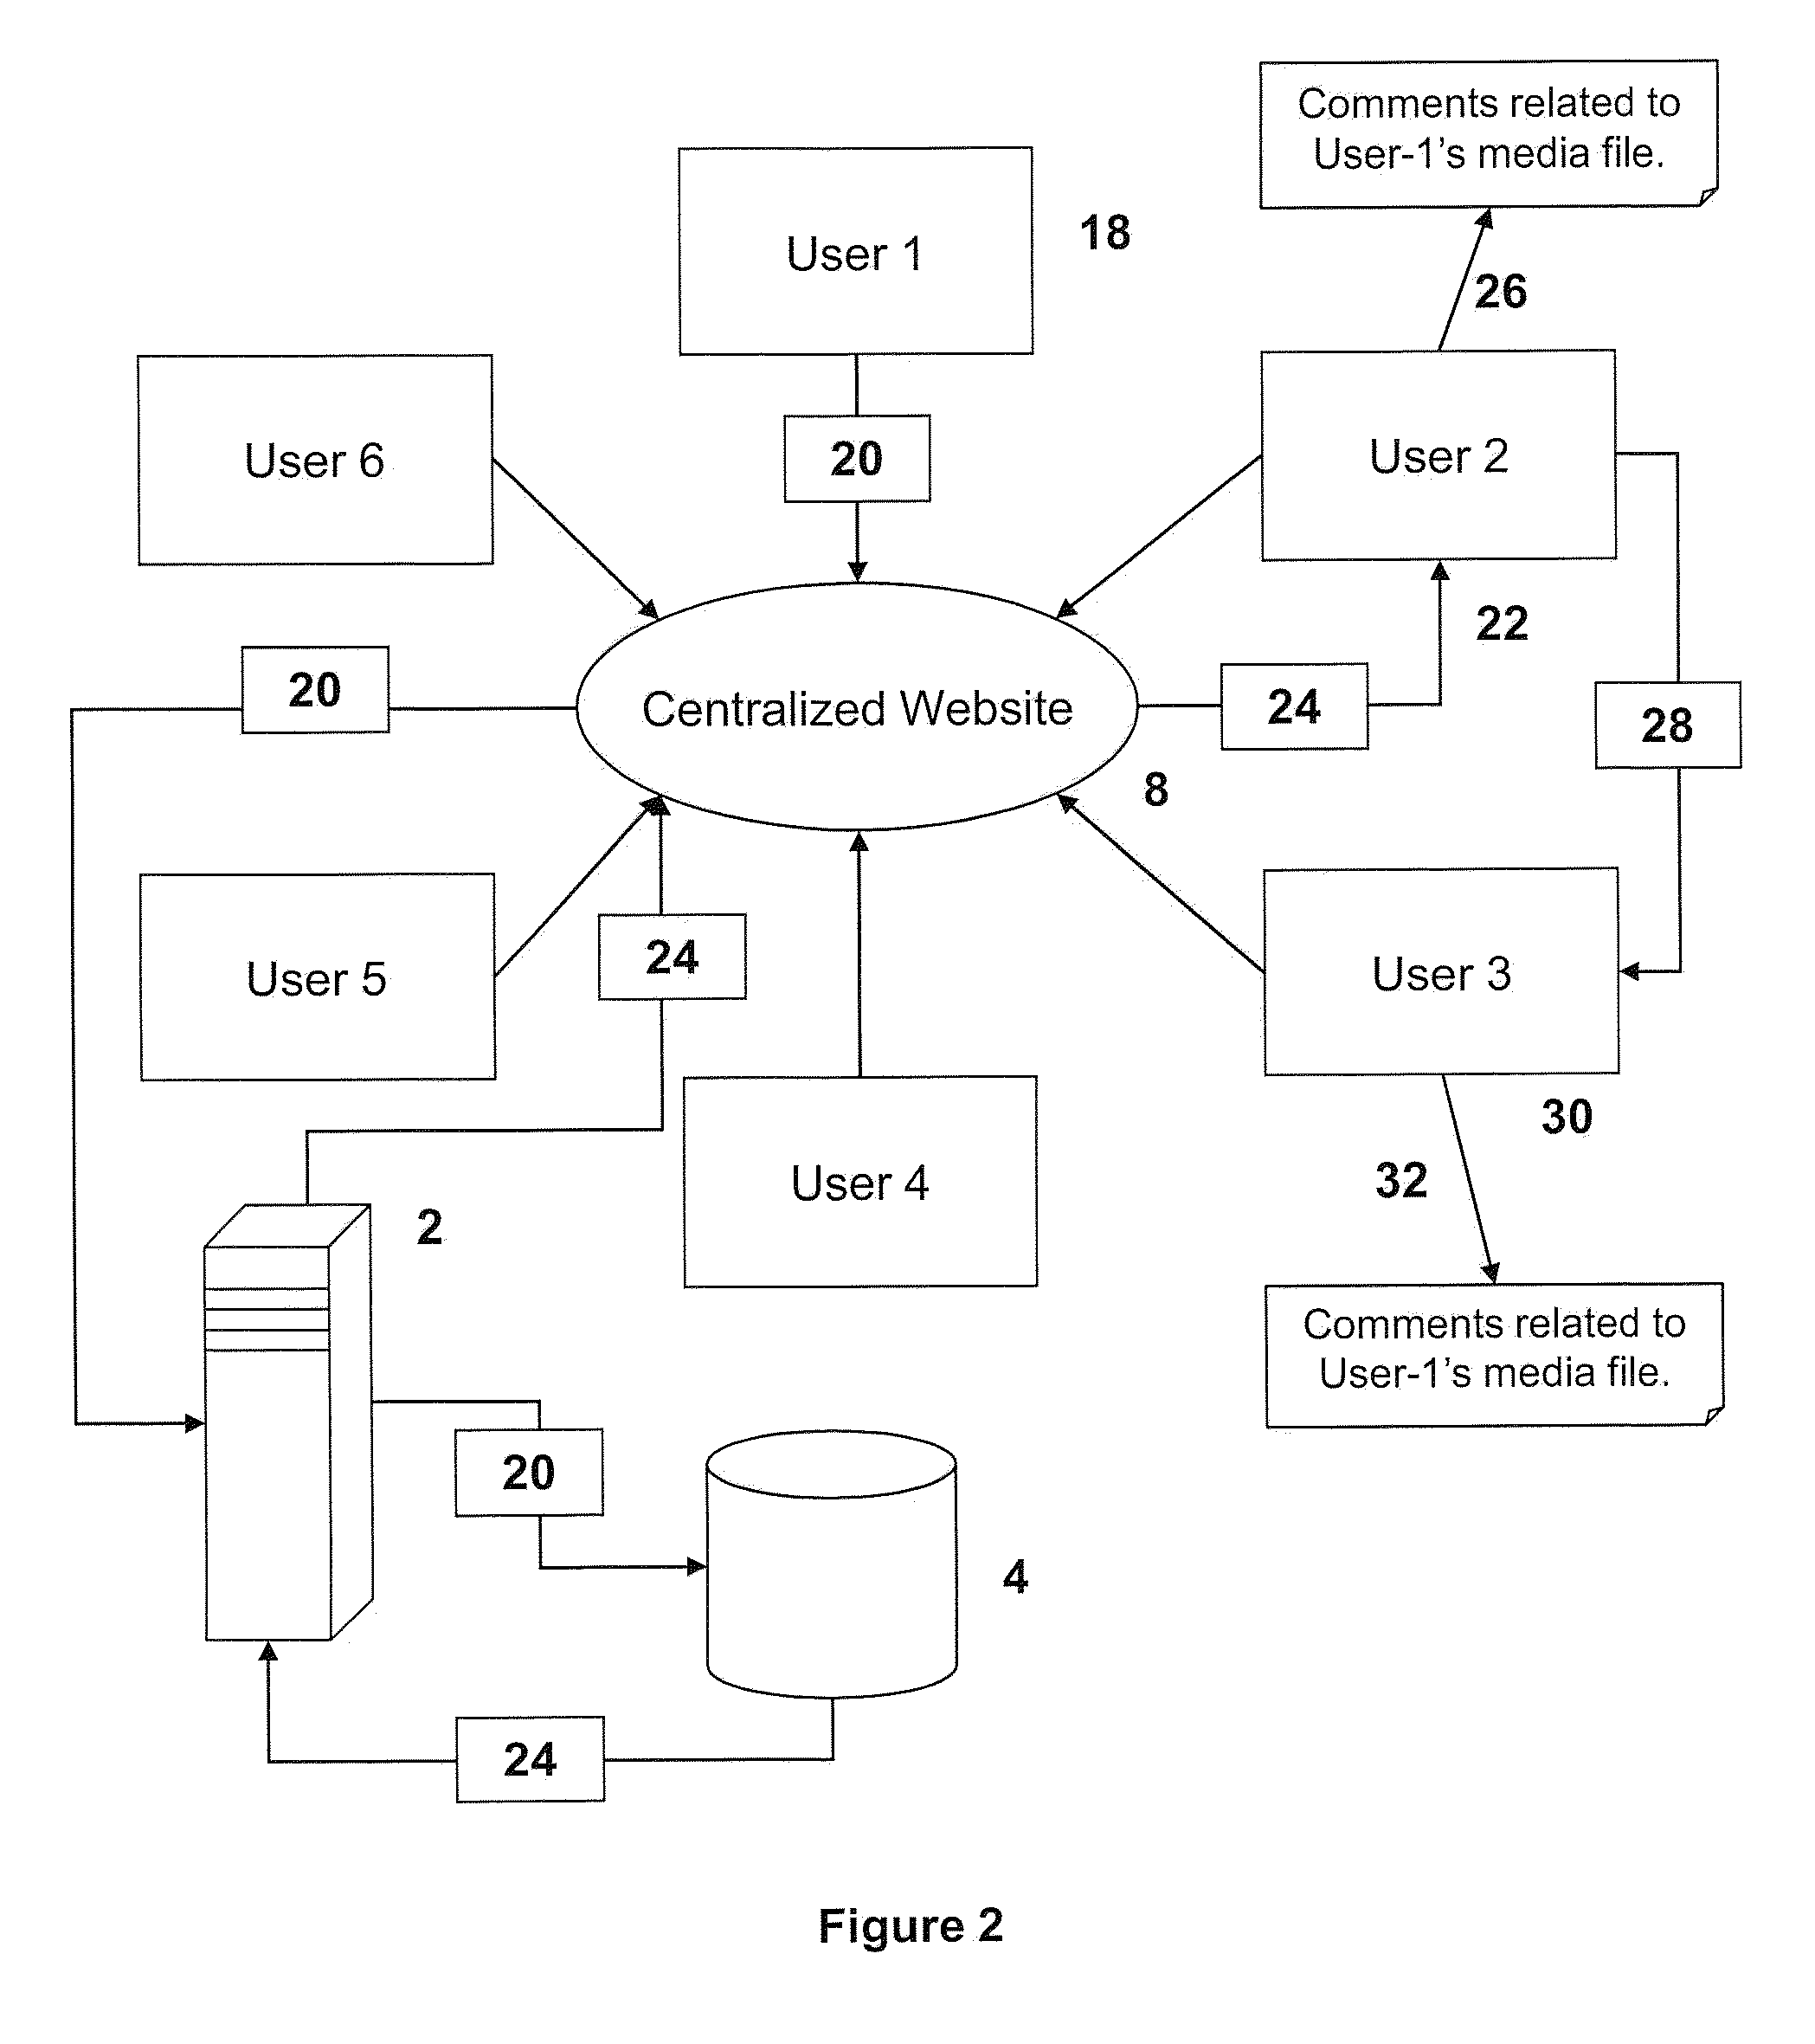 Systems and methods for organizing and analyzing audio content derived from media files